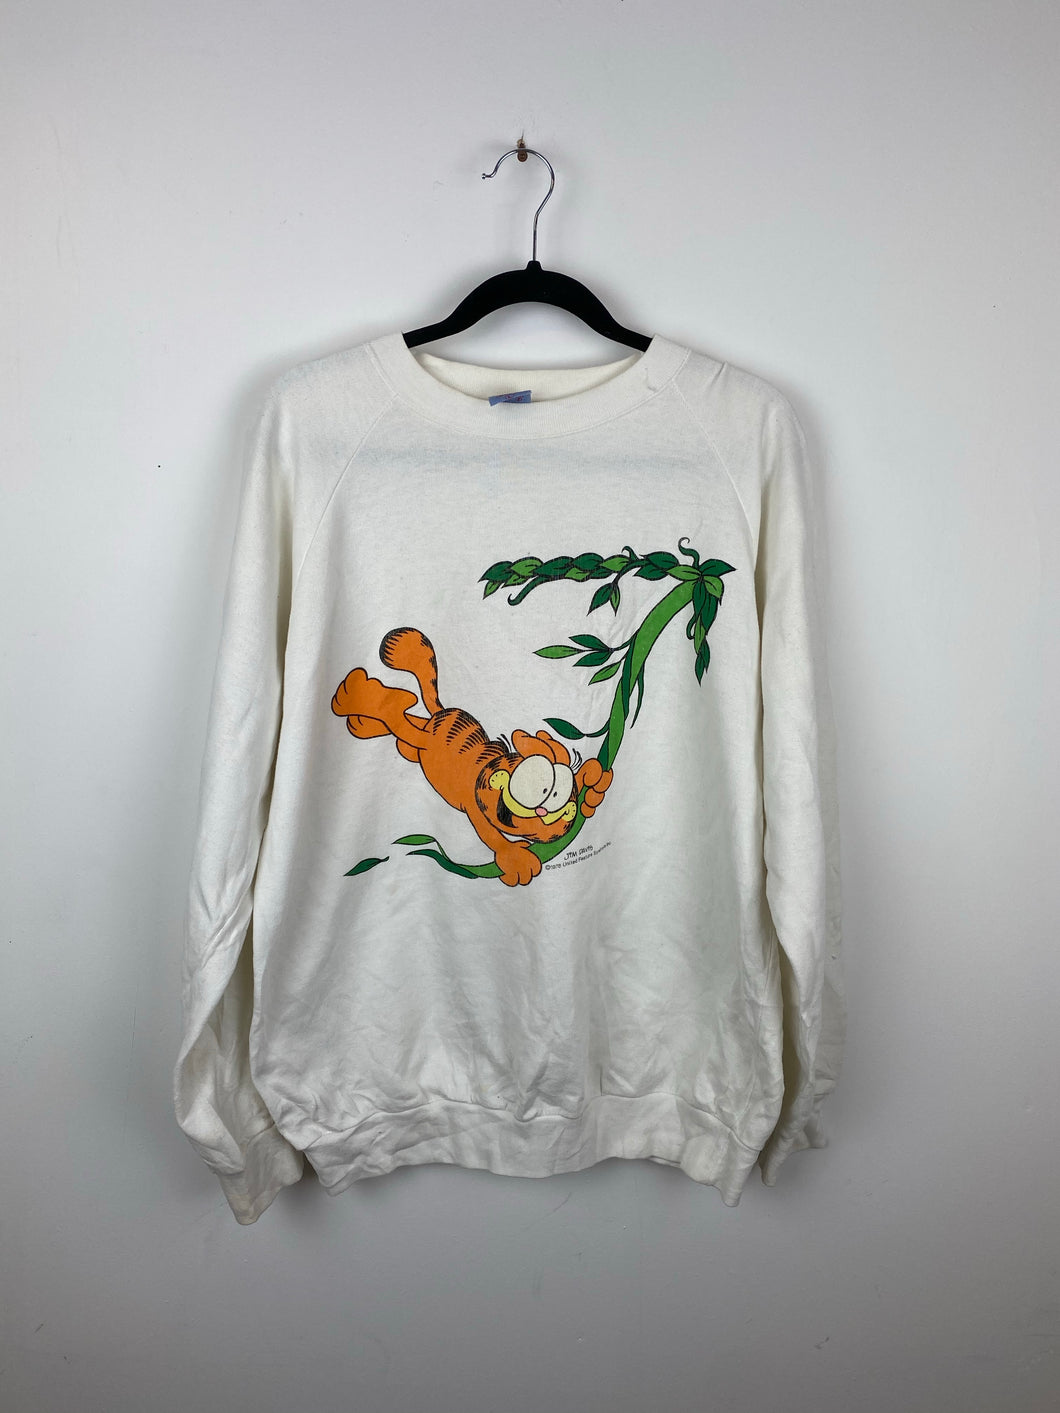 1978 front and back Garfield crewneck